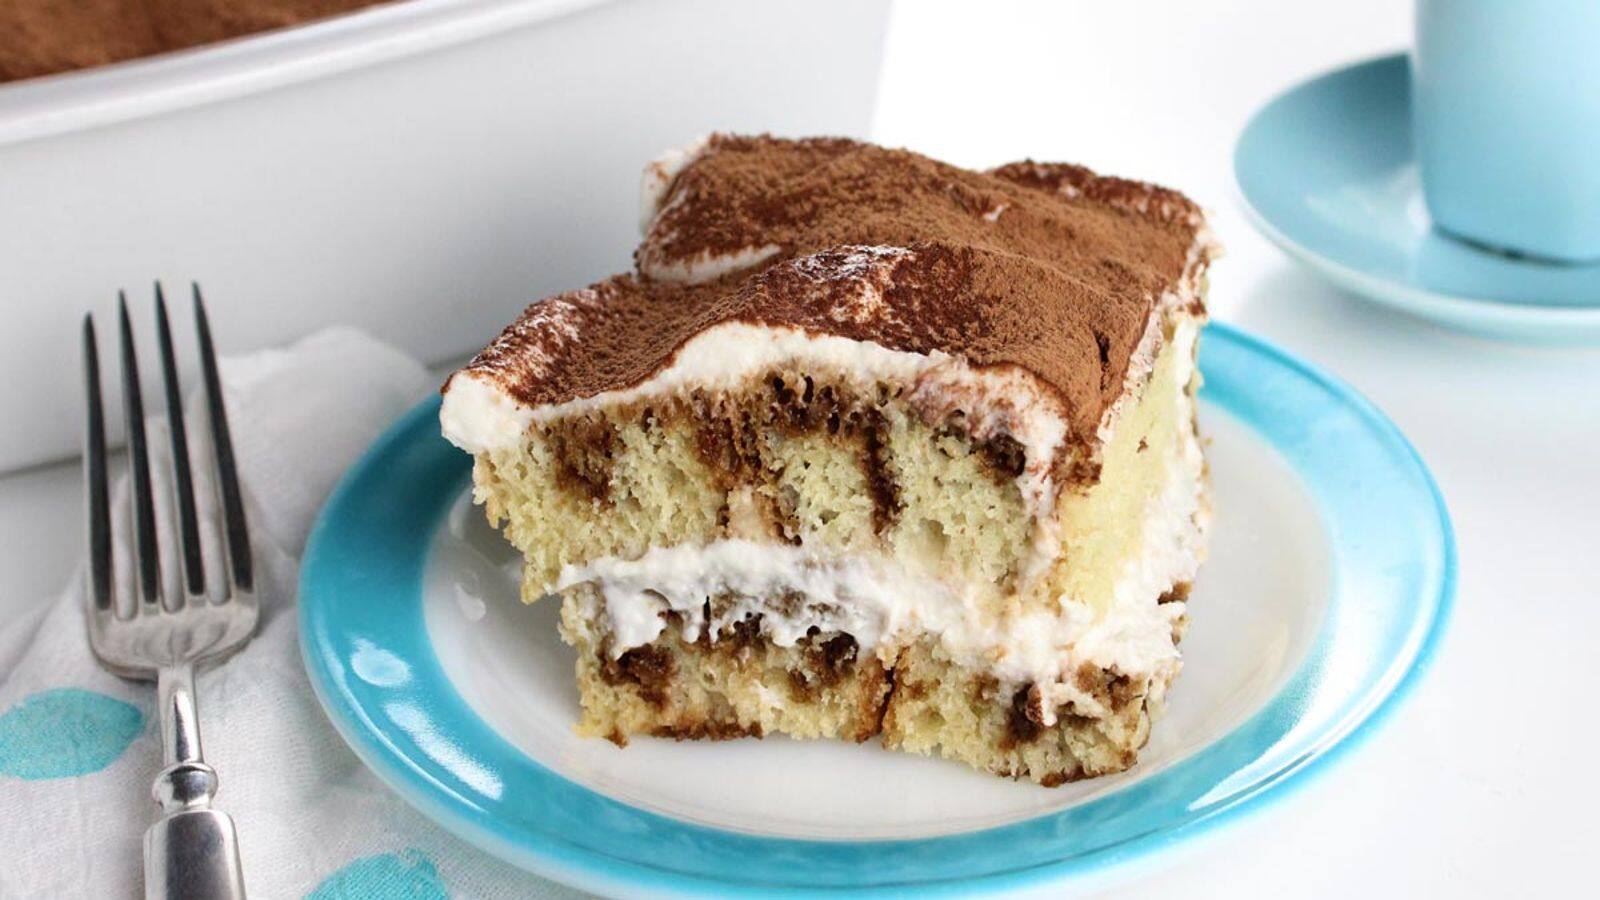 Your guests will love this eggless tiramisu. Here's the recipe